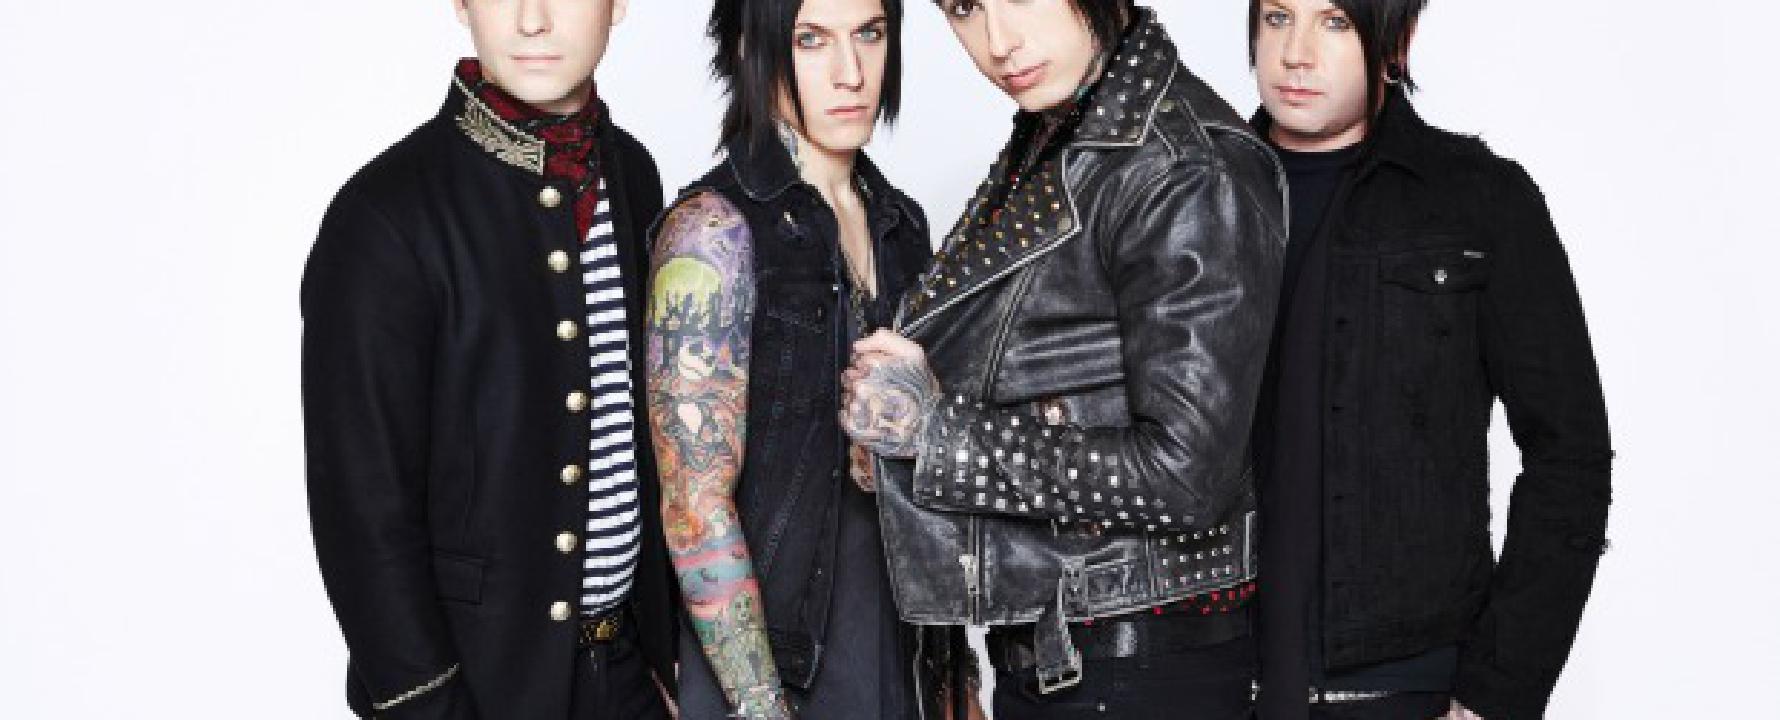 Promotional photograph of Falling In Reverse.